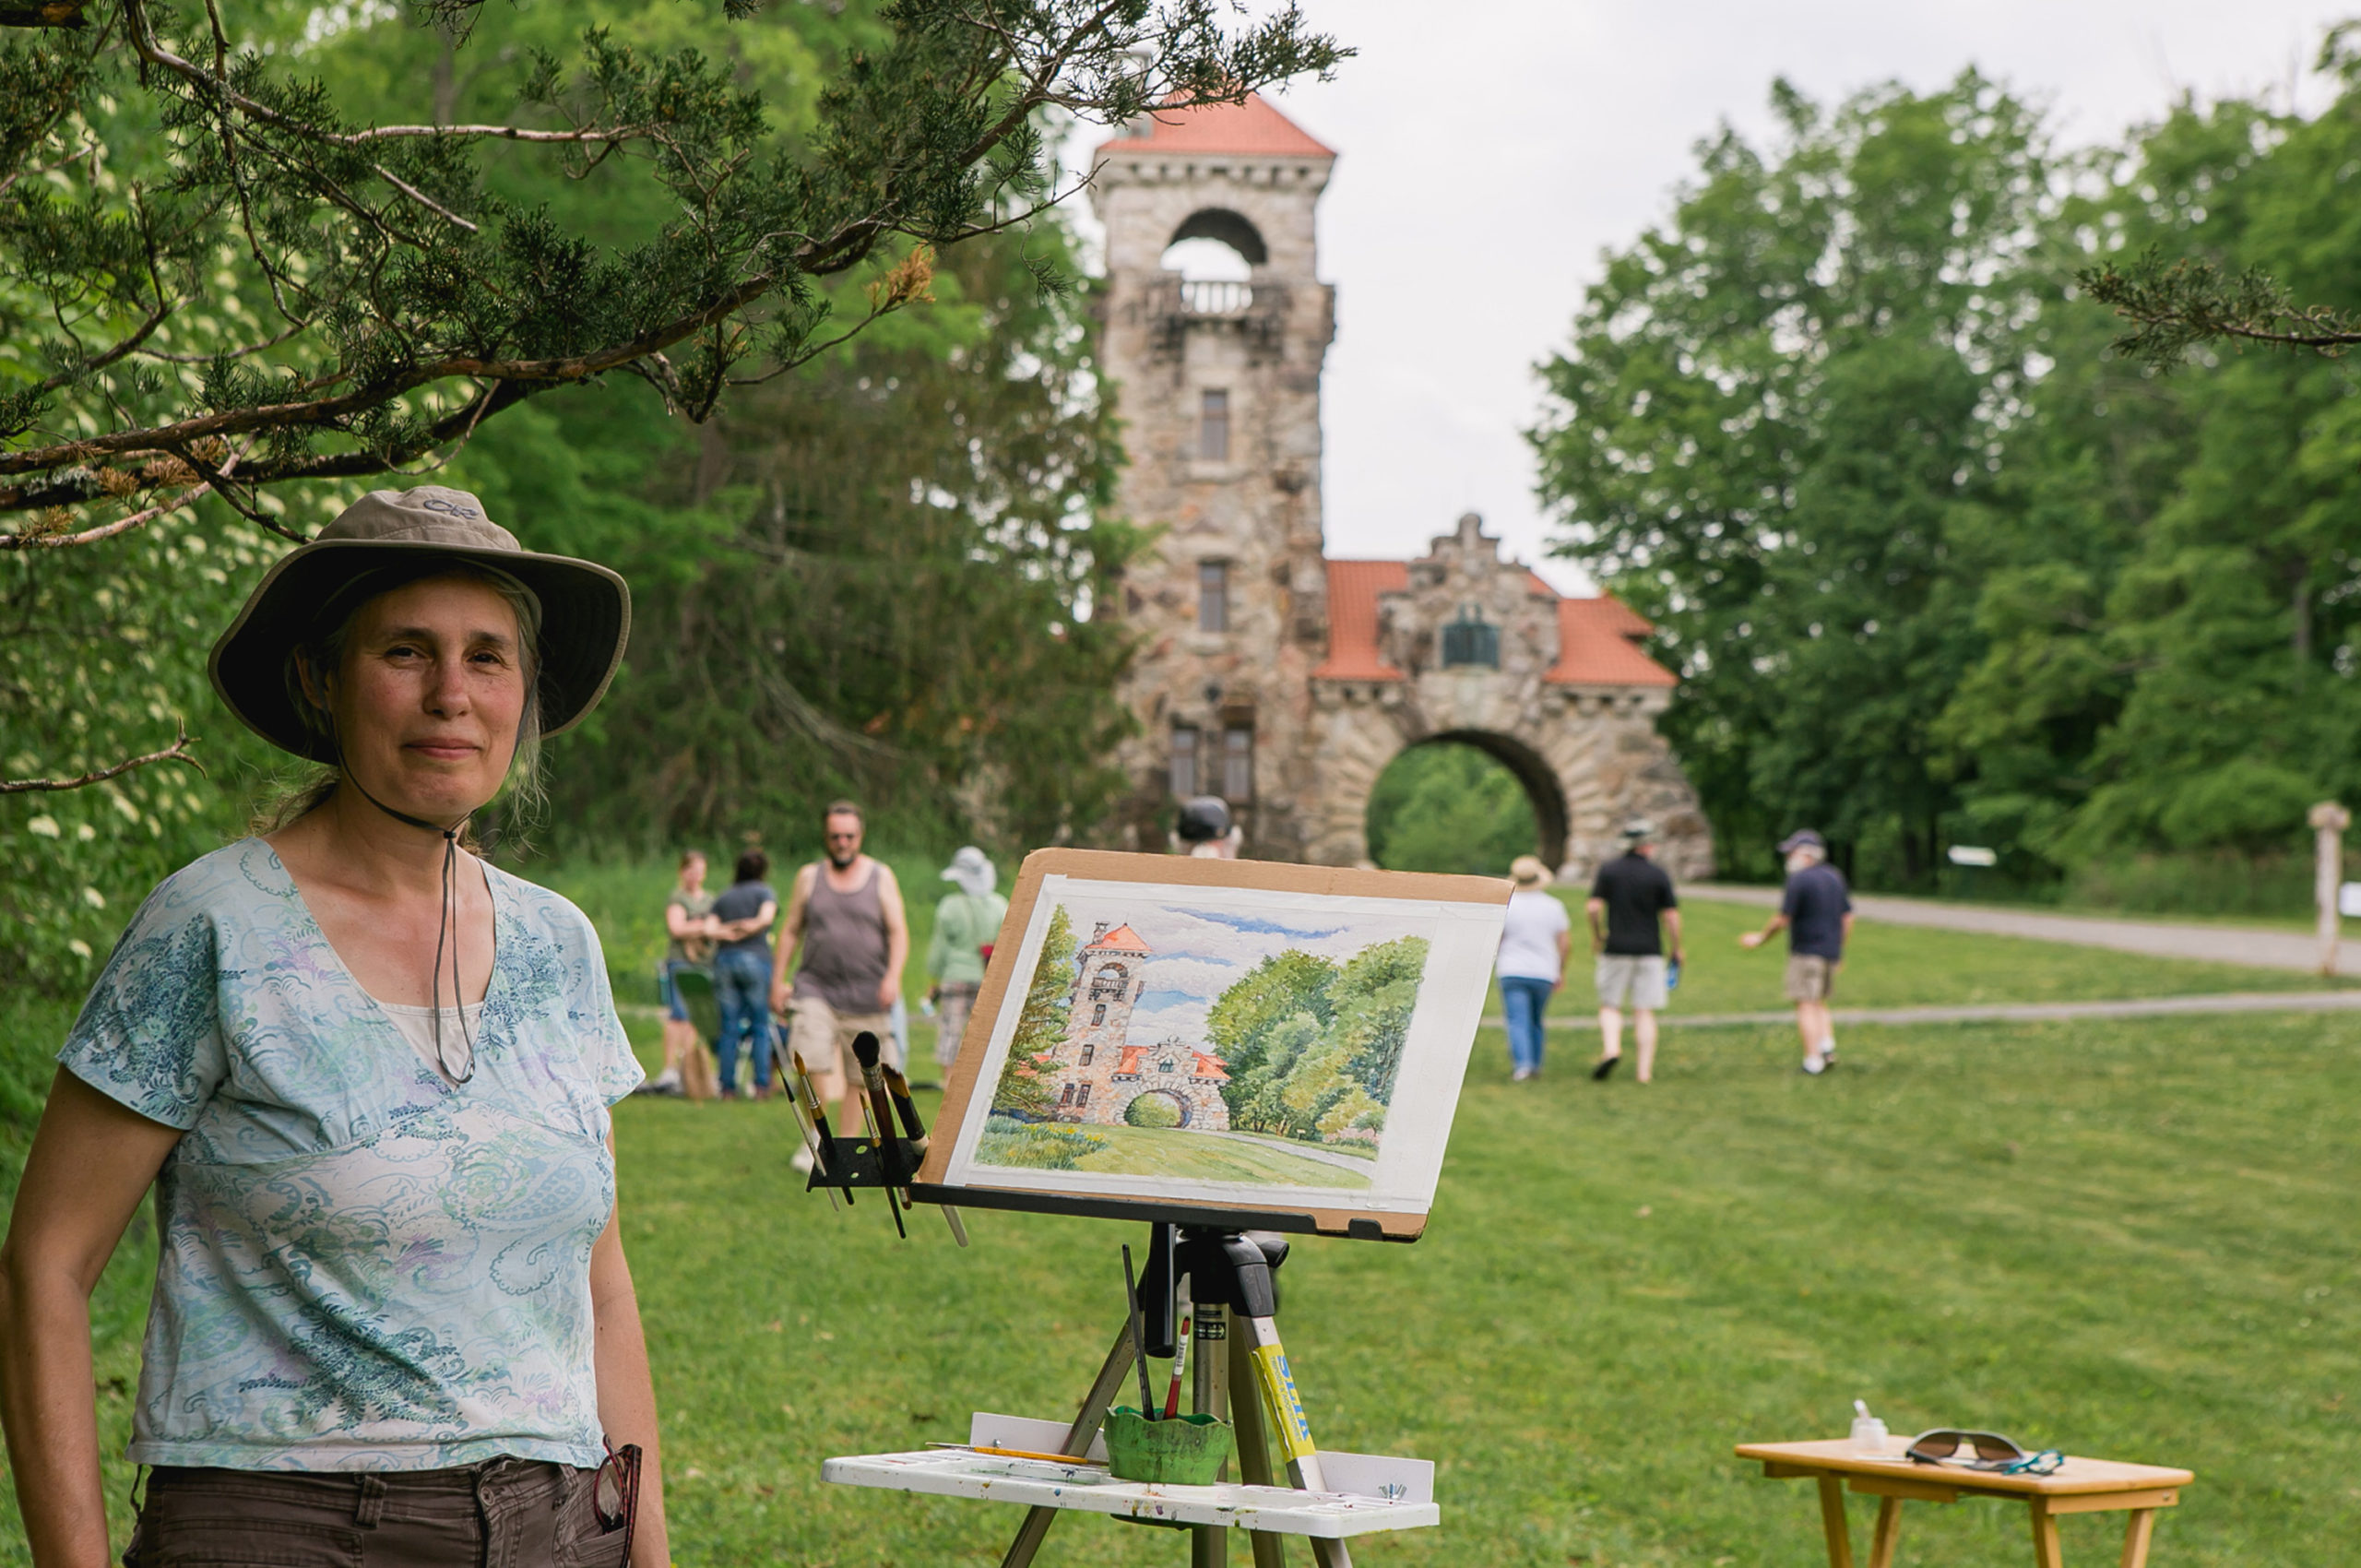 Artist posing with their painting at the Plein Air Artwalk